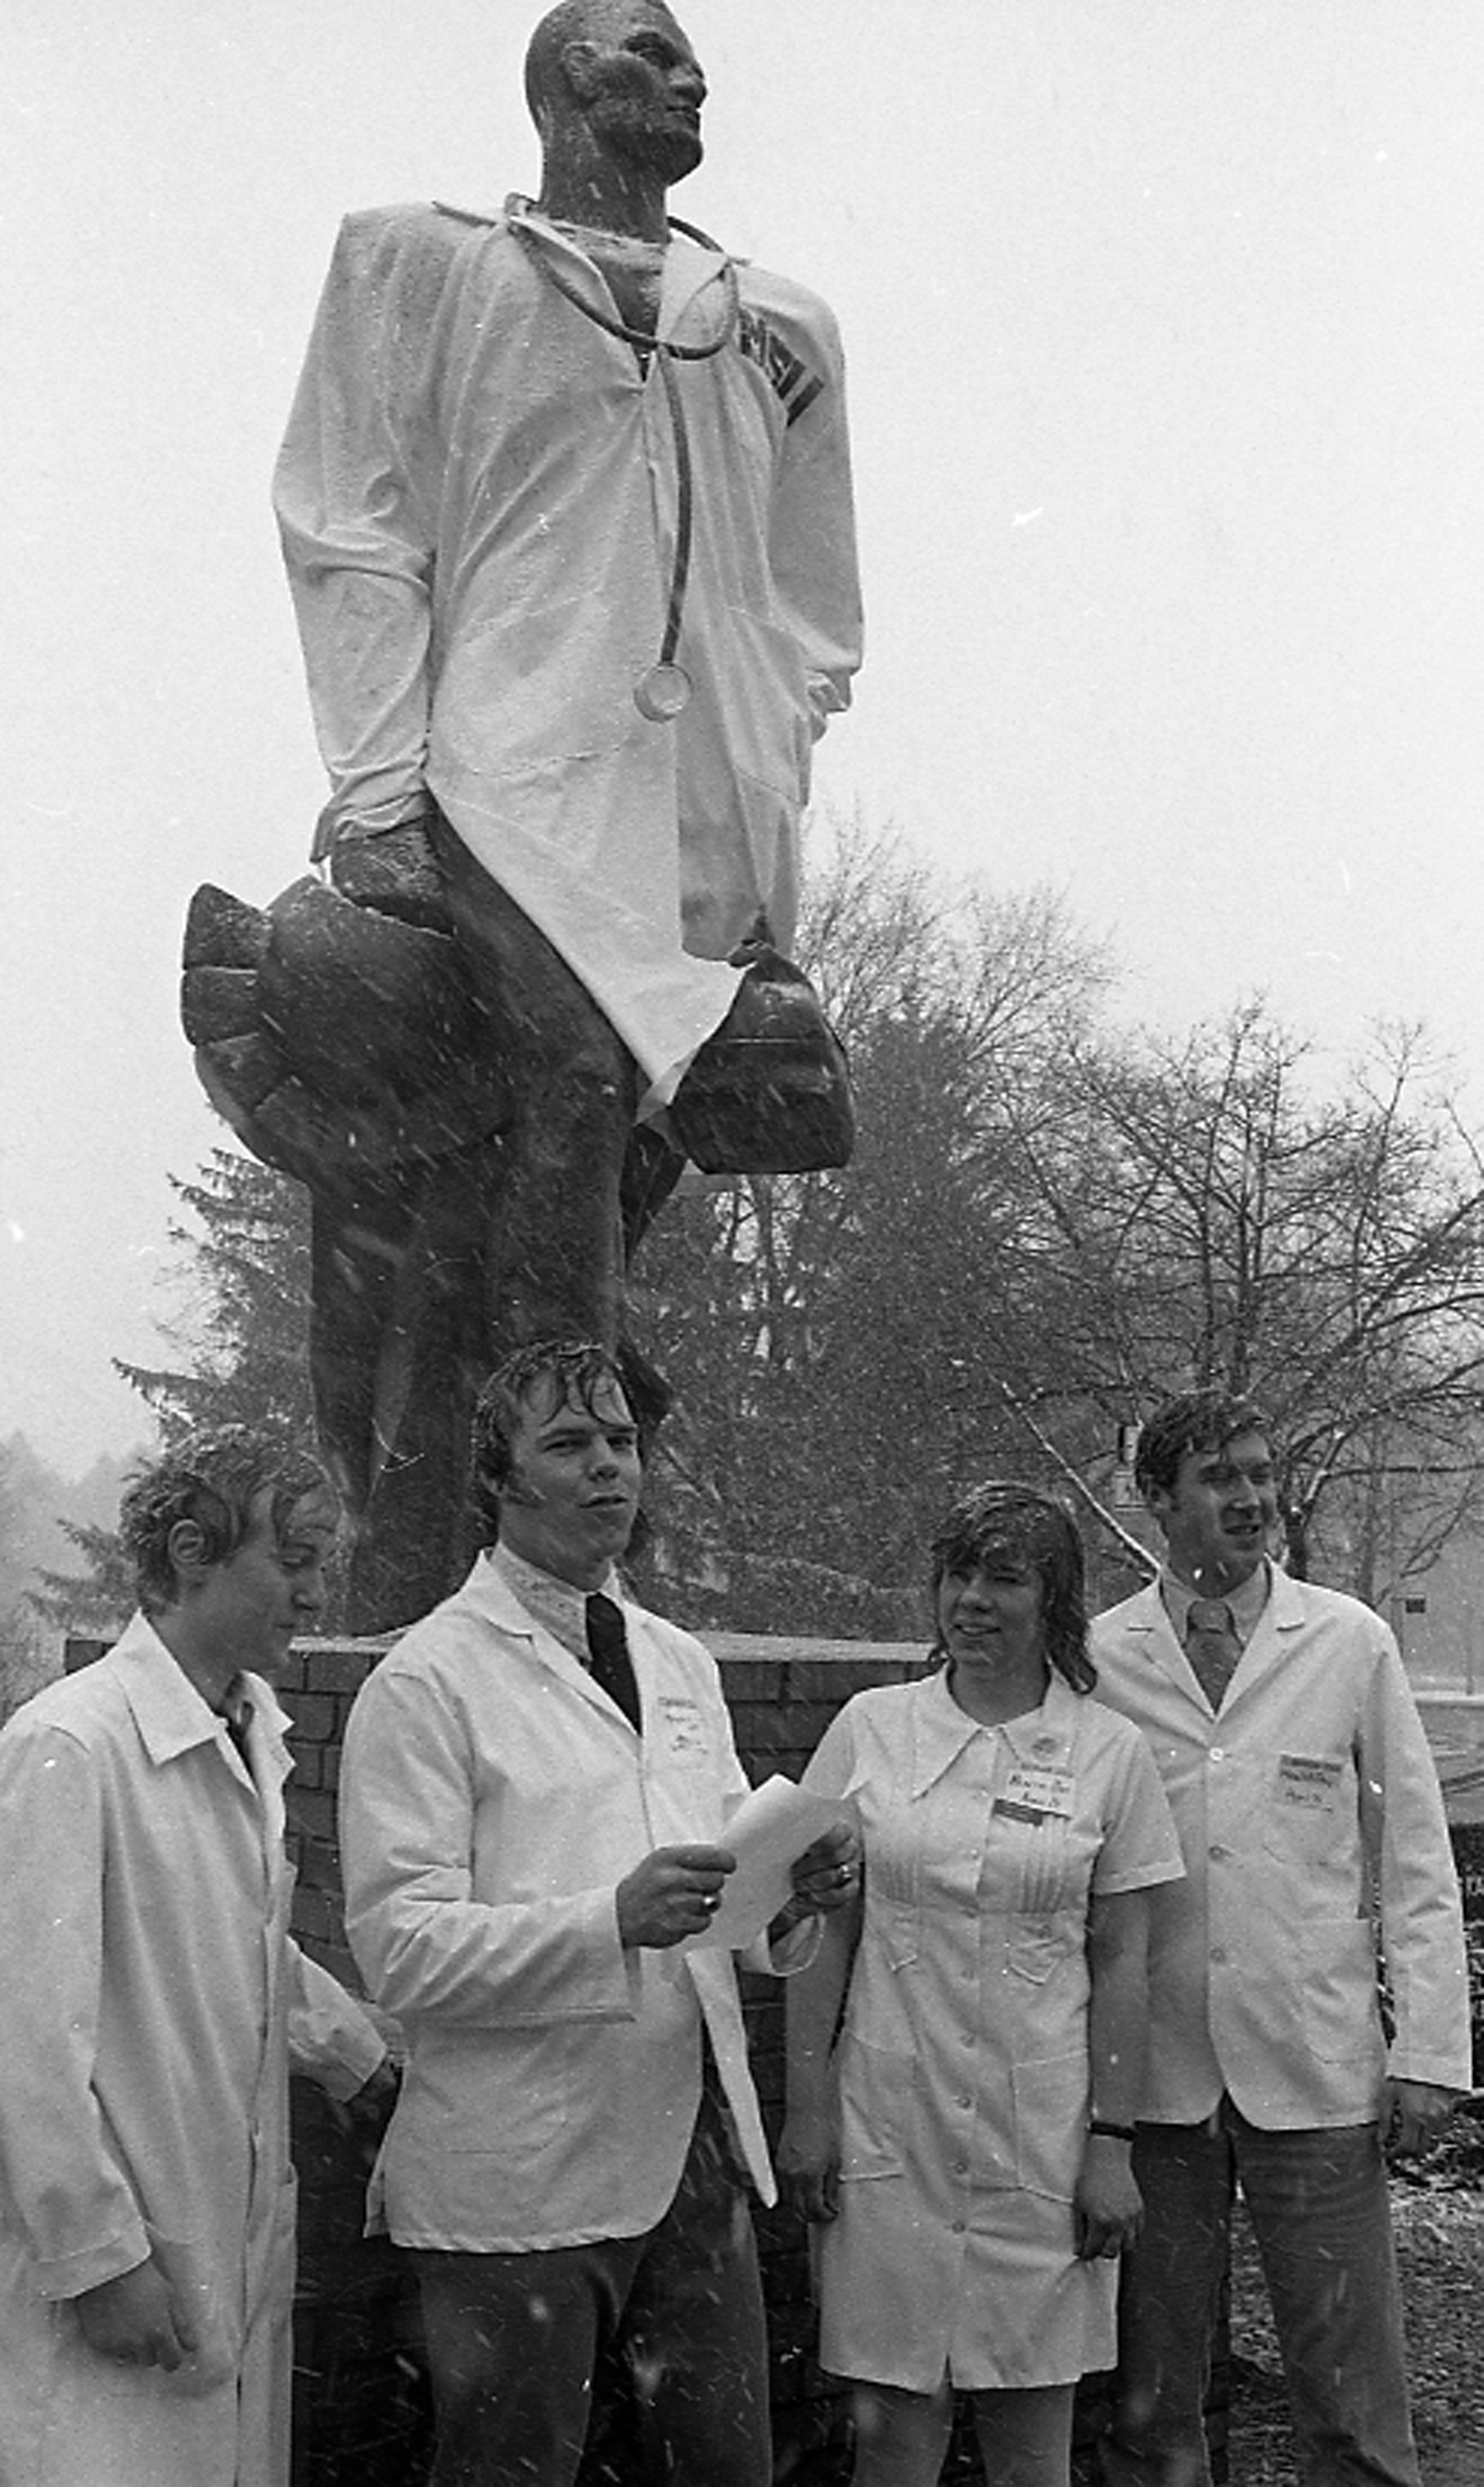 Medical coat on Sparty Statue, 1973